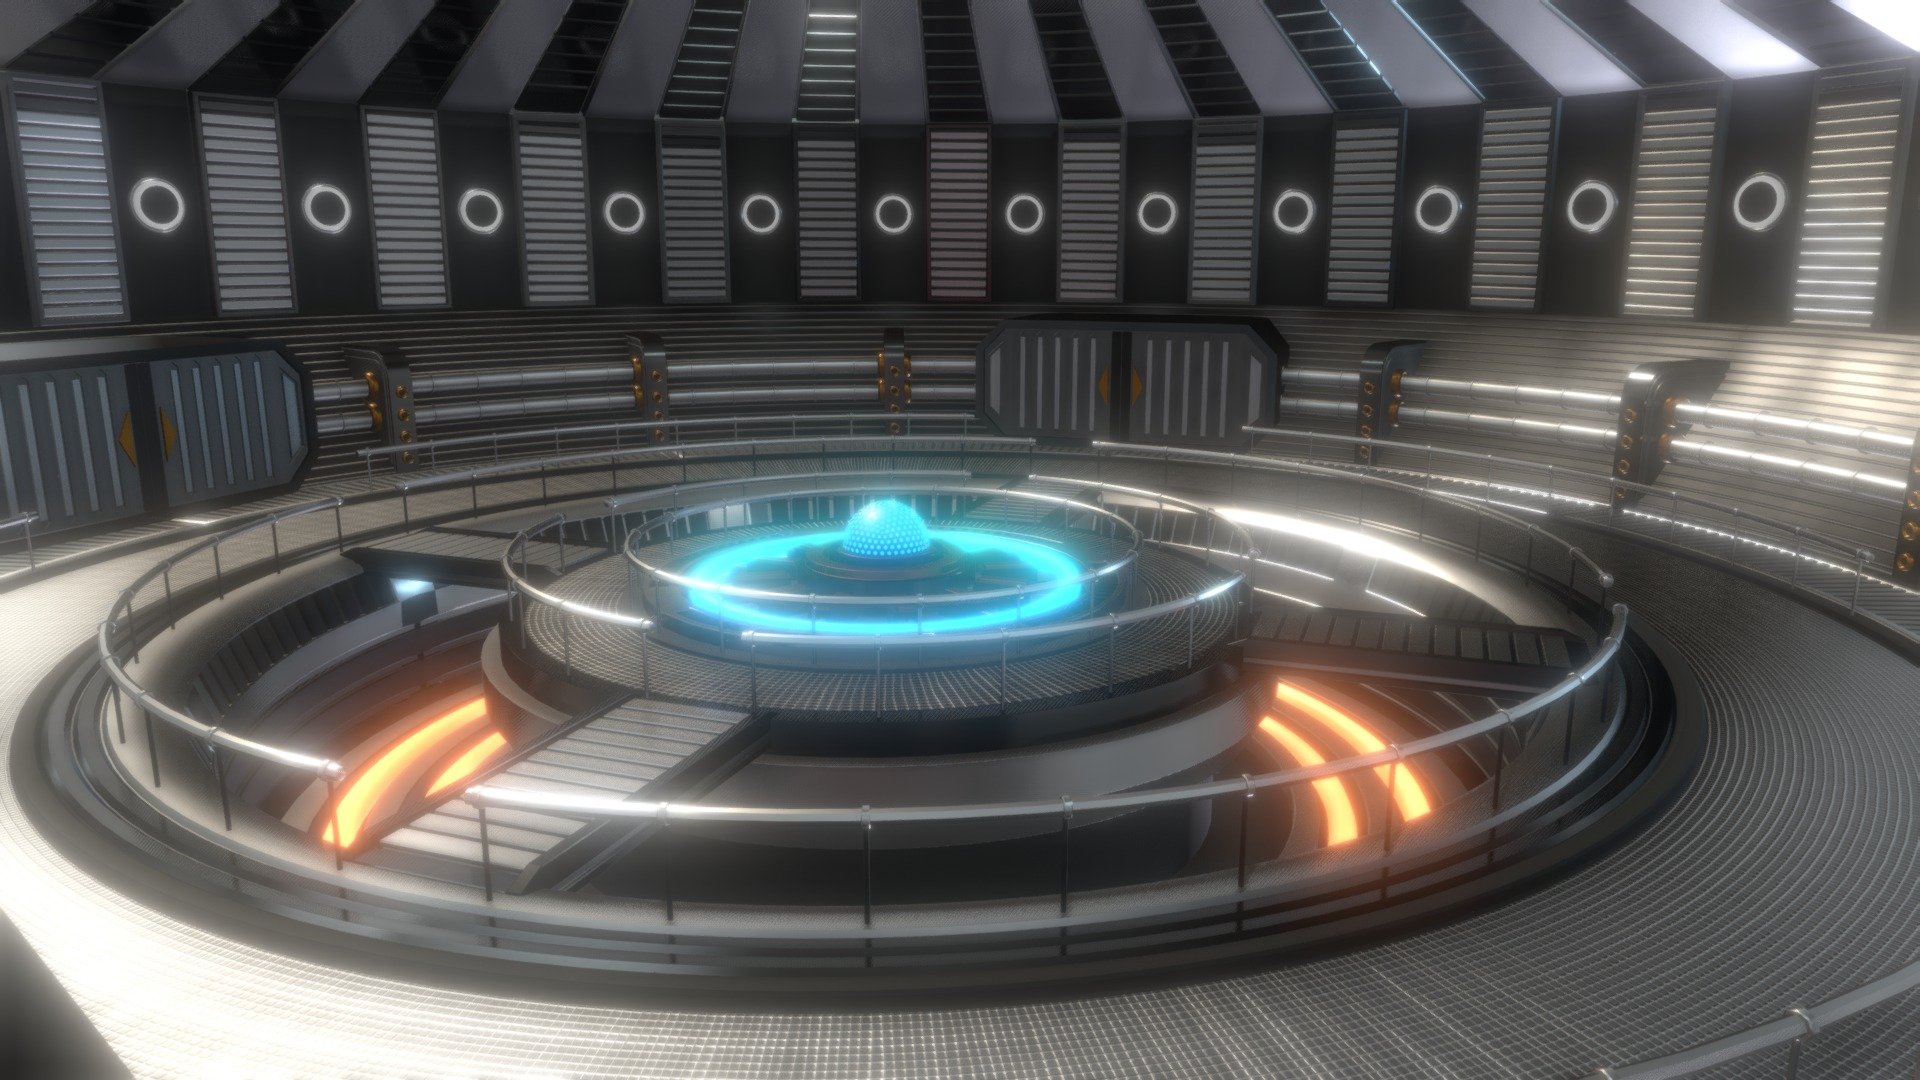 Sci-Fi Interior Scene 3D Model can be used as an engine/core room, futuristic interior, sci-fi scene, etc. in your sci-fi scenes, videos, games, and others.  

All textures and materials are included and mapped in every format. The model is completely ready for visualization in any 3d software and engine.  

Technical details:


File formats included in the package are: FBX, OBJ, GLB, PLY, STL, ABC, DAE, BLEND, gLTF (generated), USDZ (generated)
Native software file format: BLEND
Render engine: Cycles
Polygons: 132,300
Vertices: 149,137
Textures: Base, Emissive, Metallic, Normal, Roughness
All textures are 2k resolution.
Model is separated into 14 major segments..
 - Sci-Fi Interior Scene 3D Model - Buy Royalty Free 3D model by 3DDisco 3d model